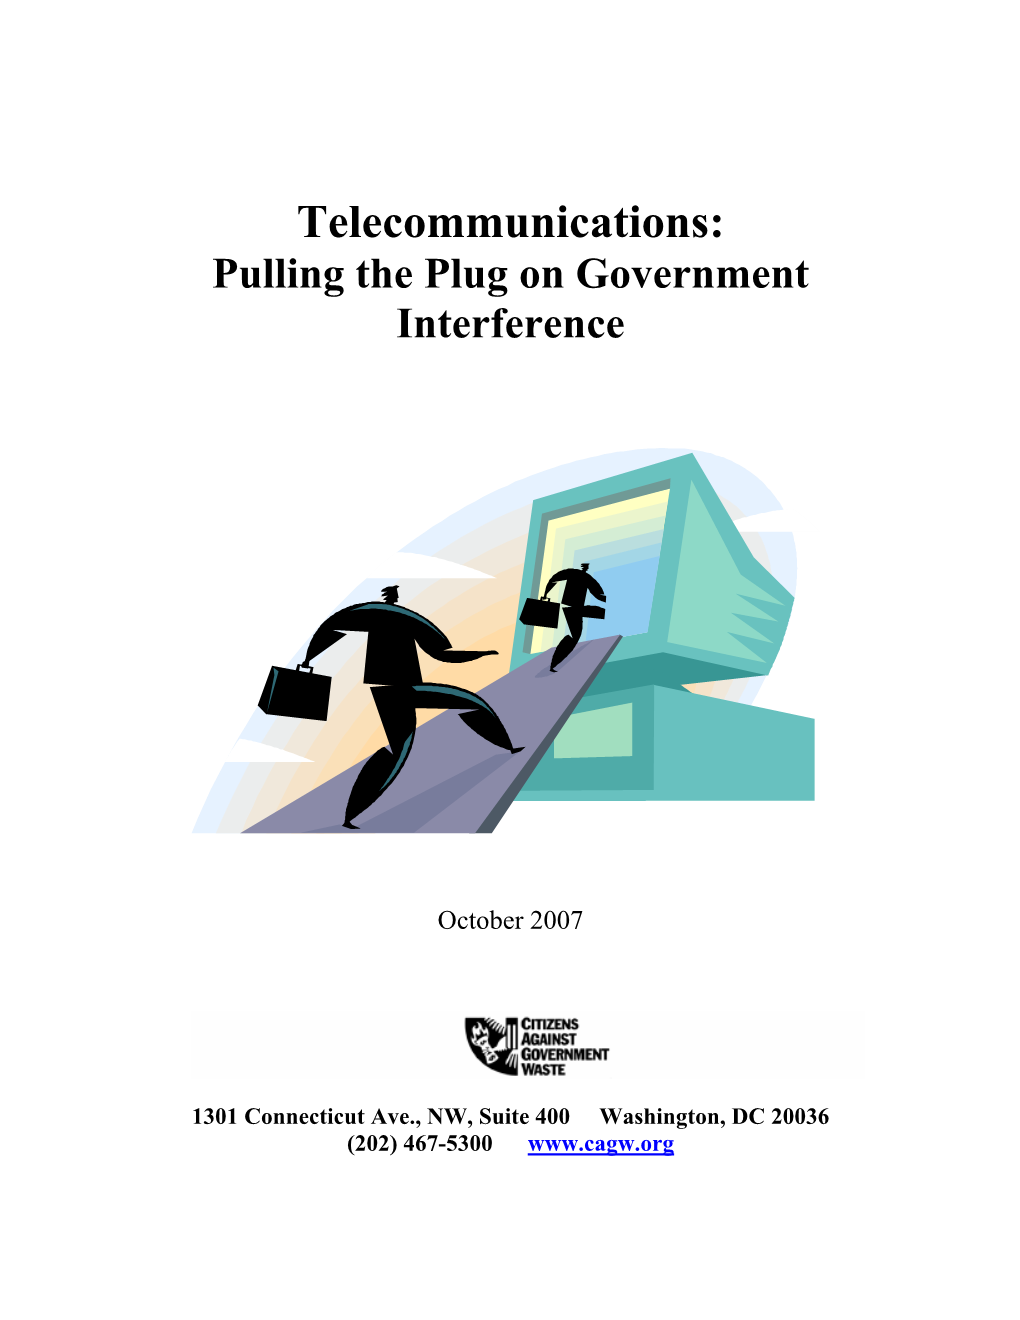 Telecommunications: Pulling the Plug on Government Interference